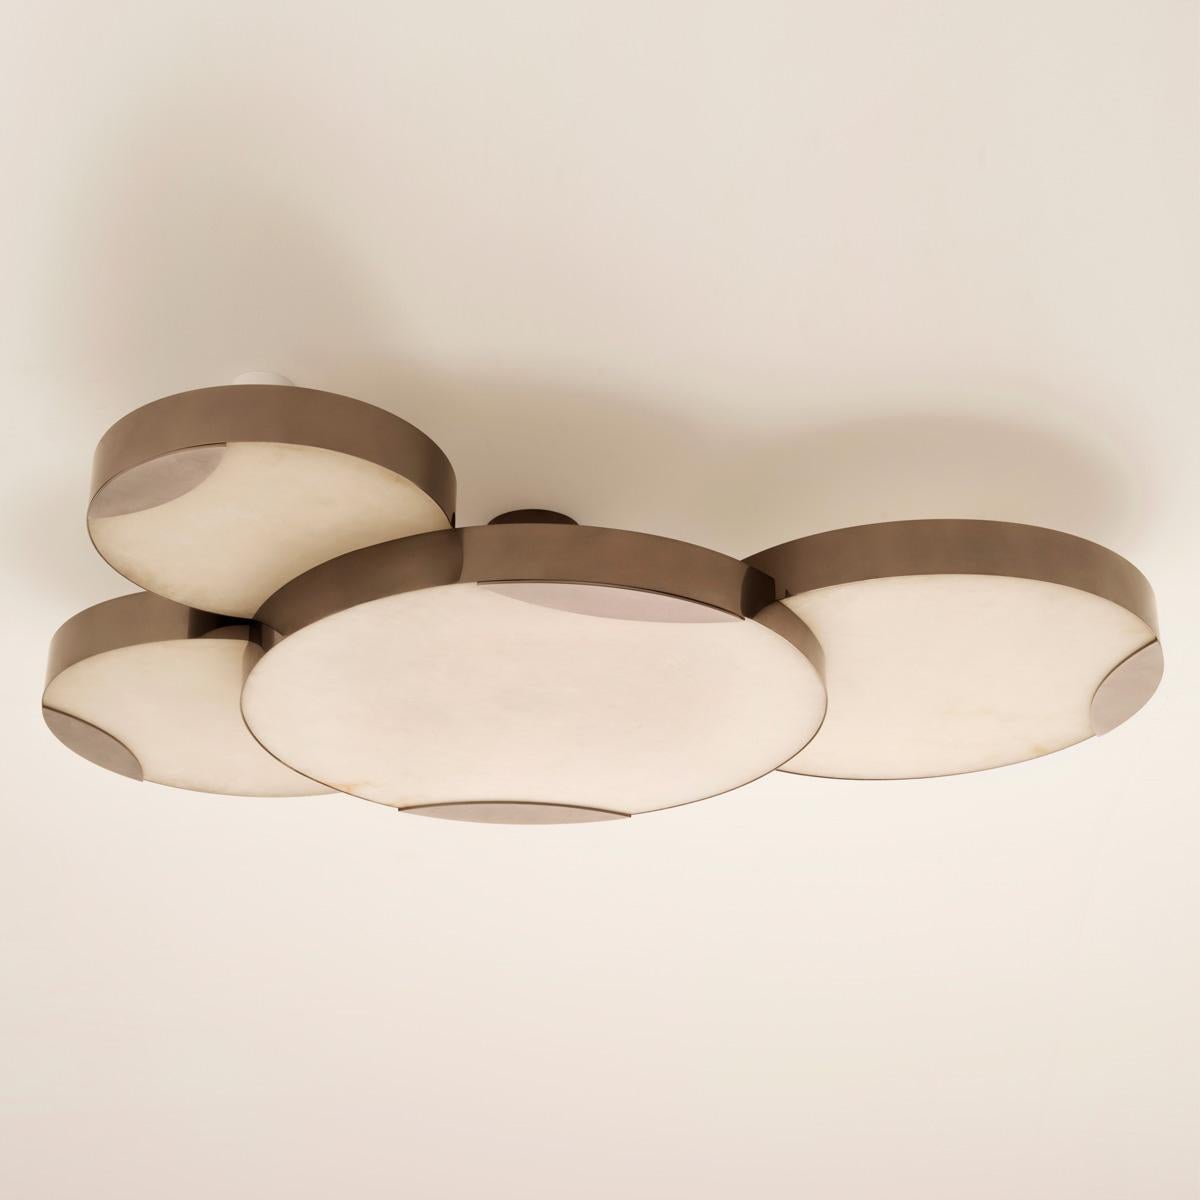 Modern Cloud N.4 Ceiling Light by Gaspare Asaro-Peltro Finish For Sale